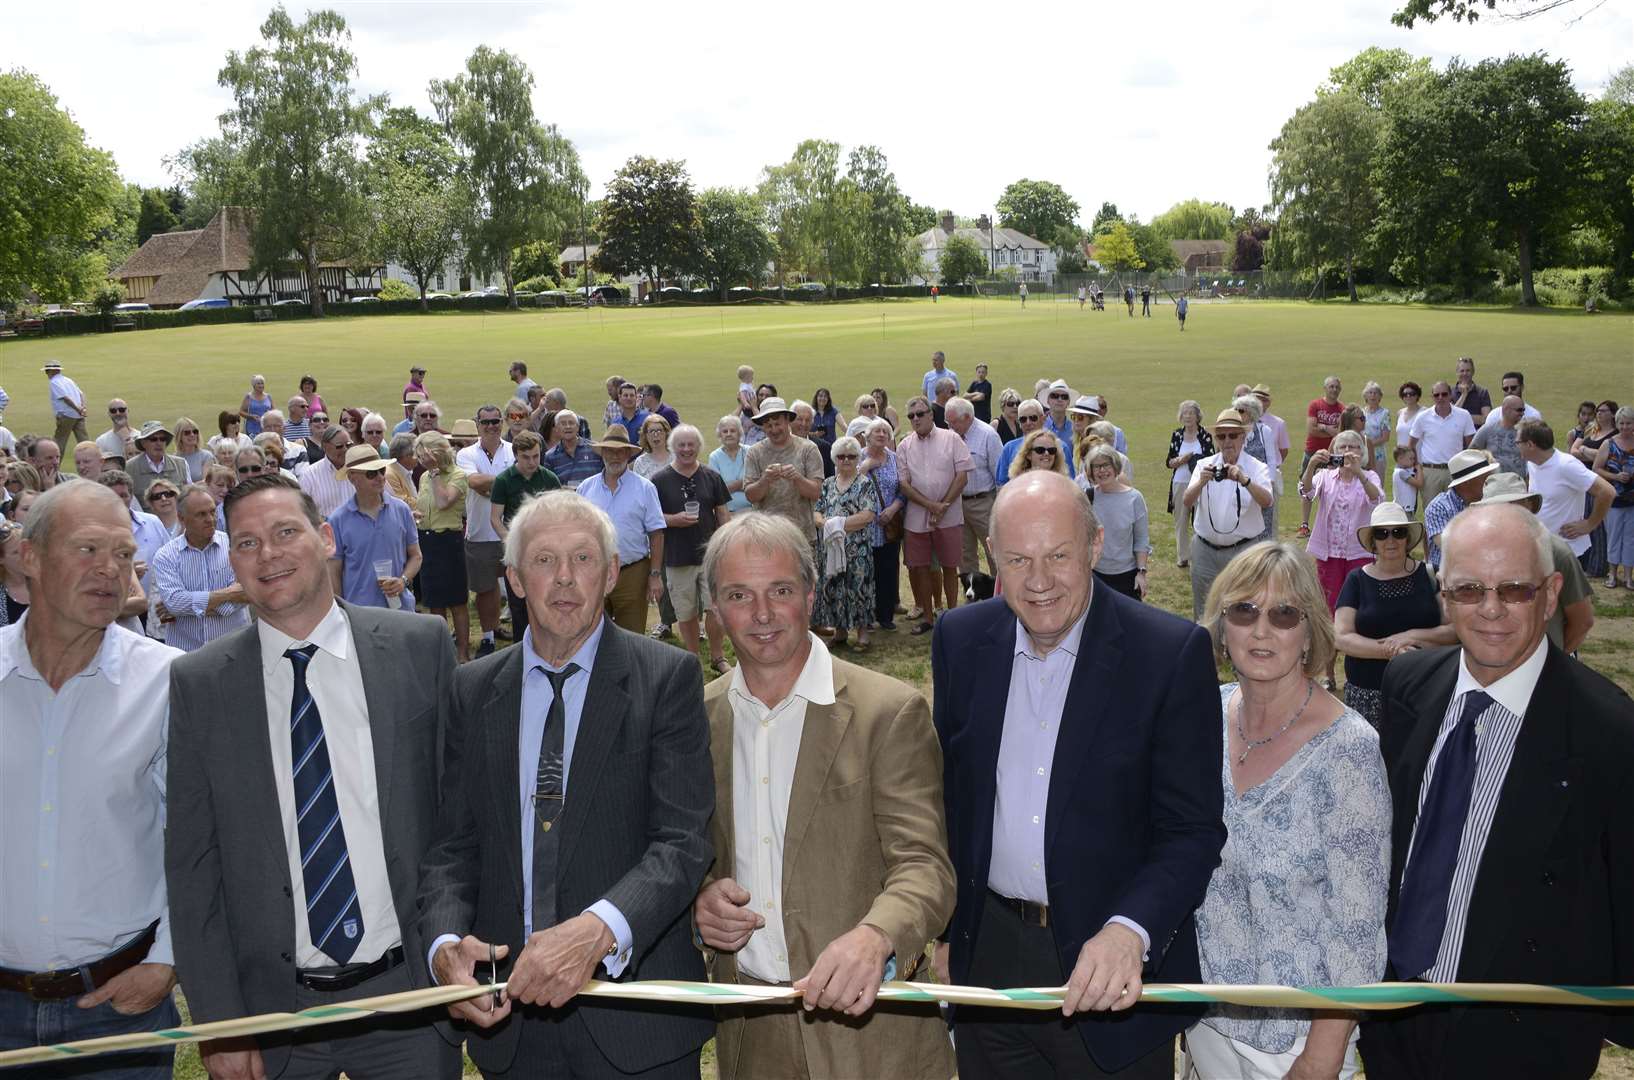 Pete Watts, cuts the ribbon at the opening of Smarden's new pavilion in 2017